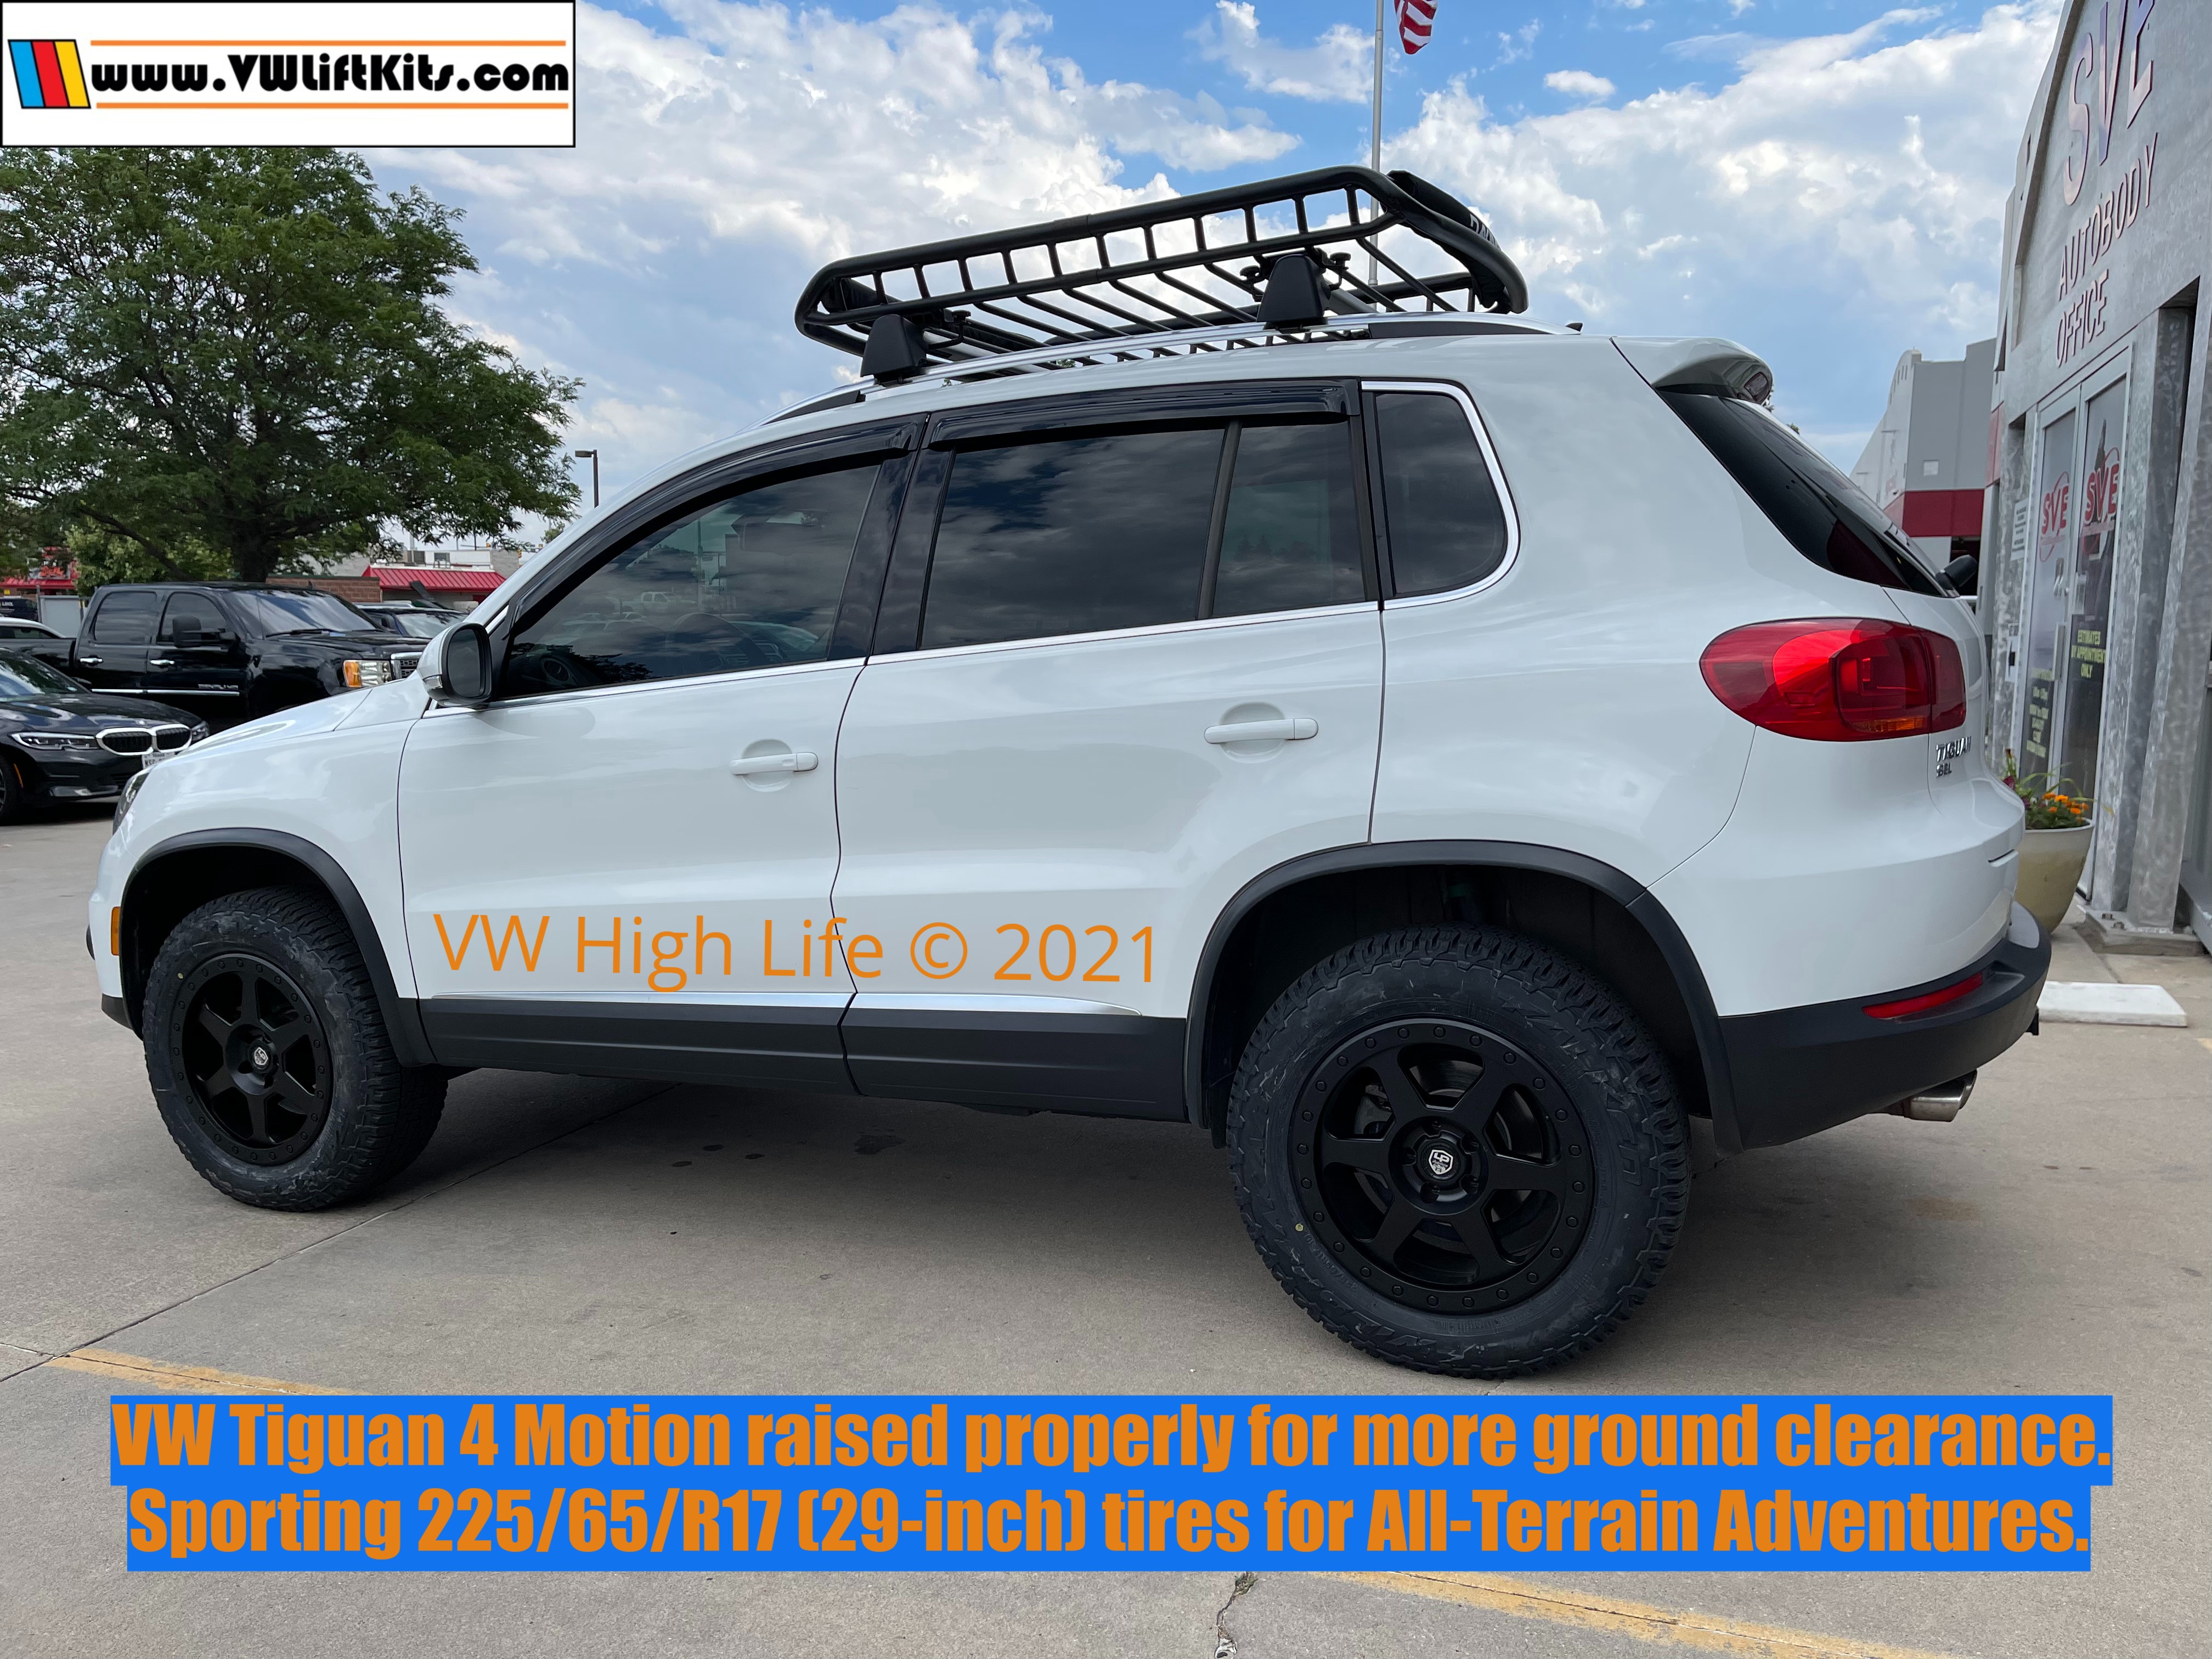 Dan properly raised his Tiguan by 2-inches using our coil and spacer kit to mount 29-inch tires.